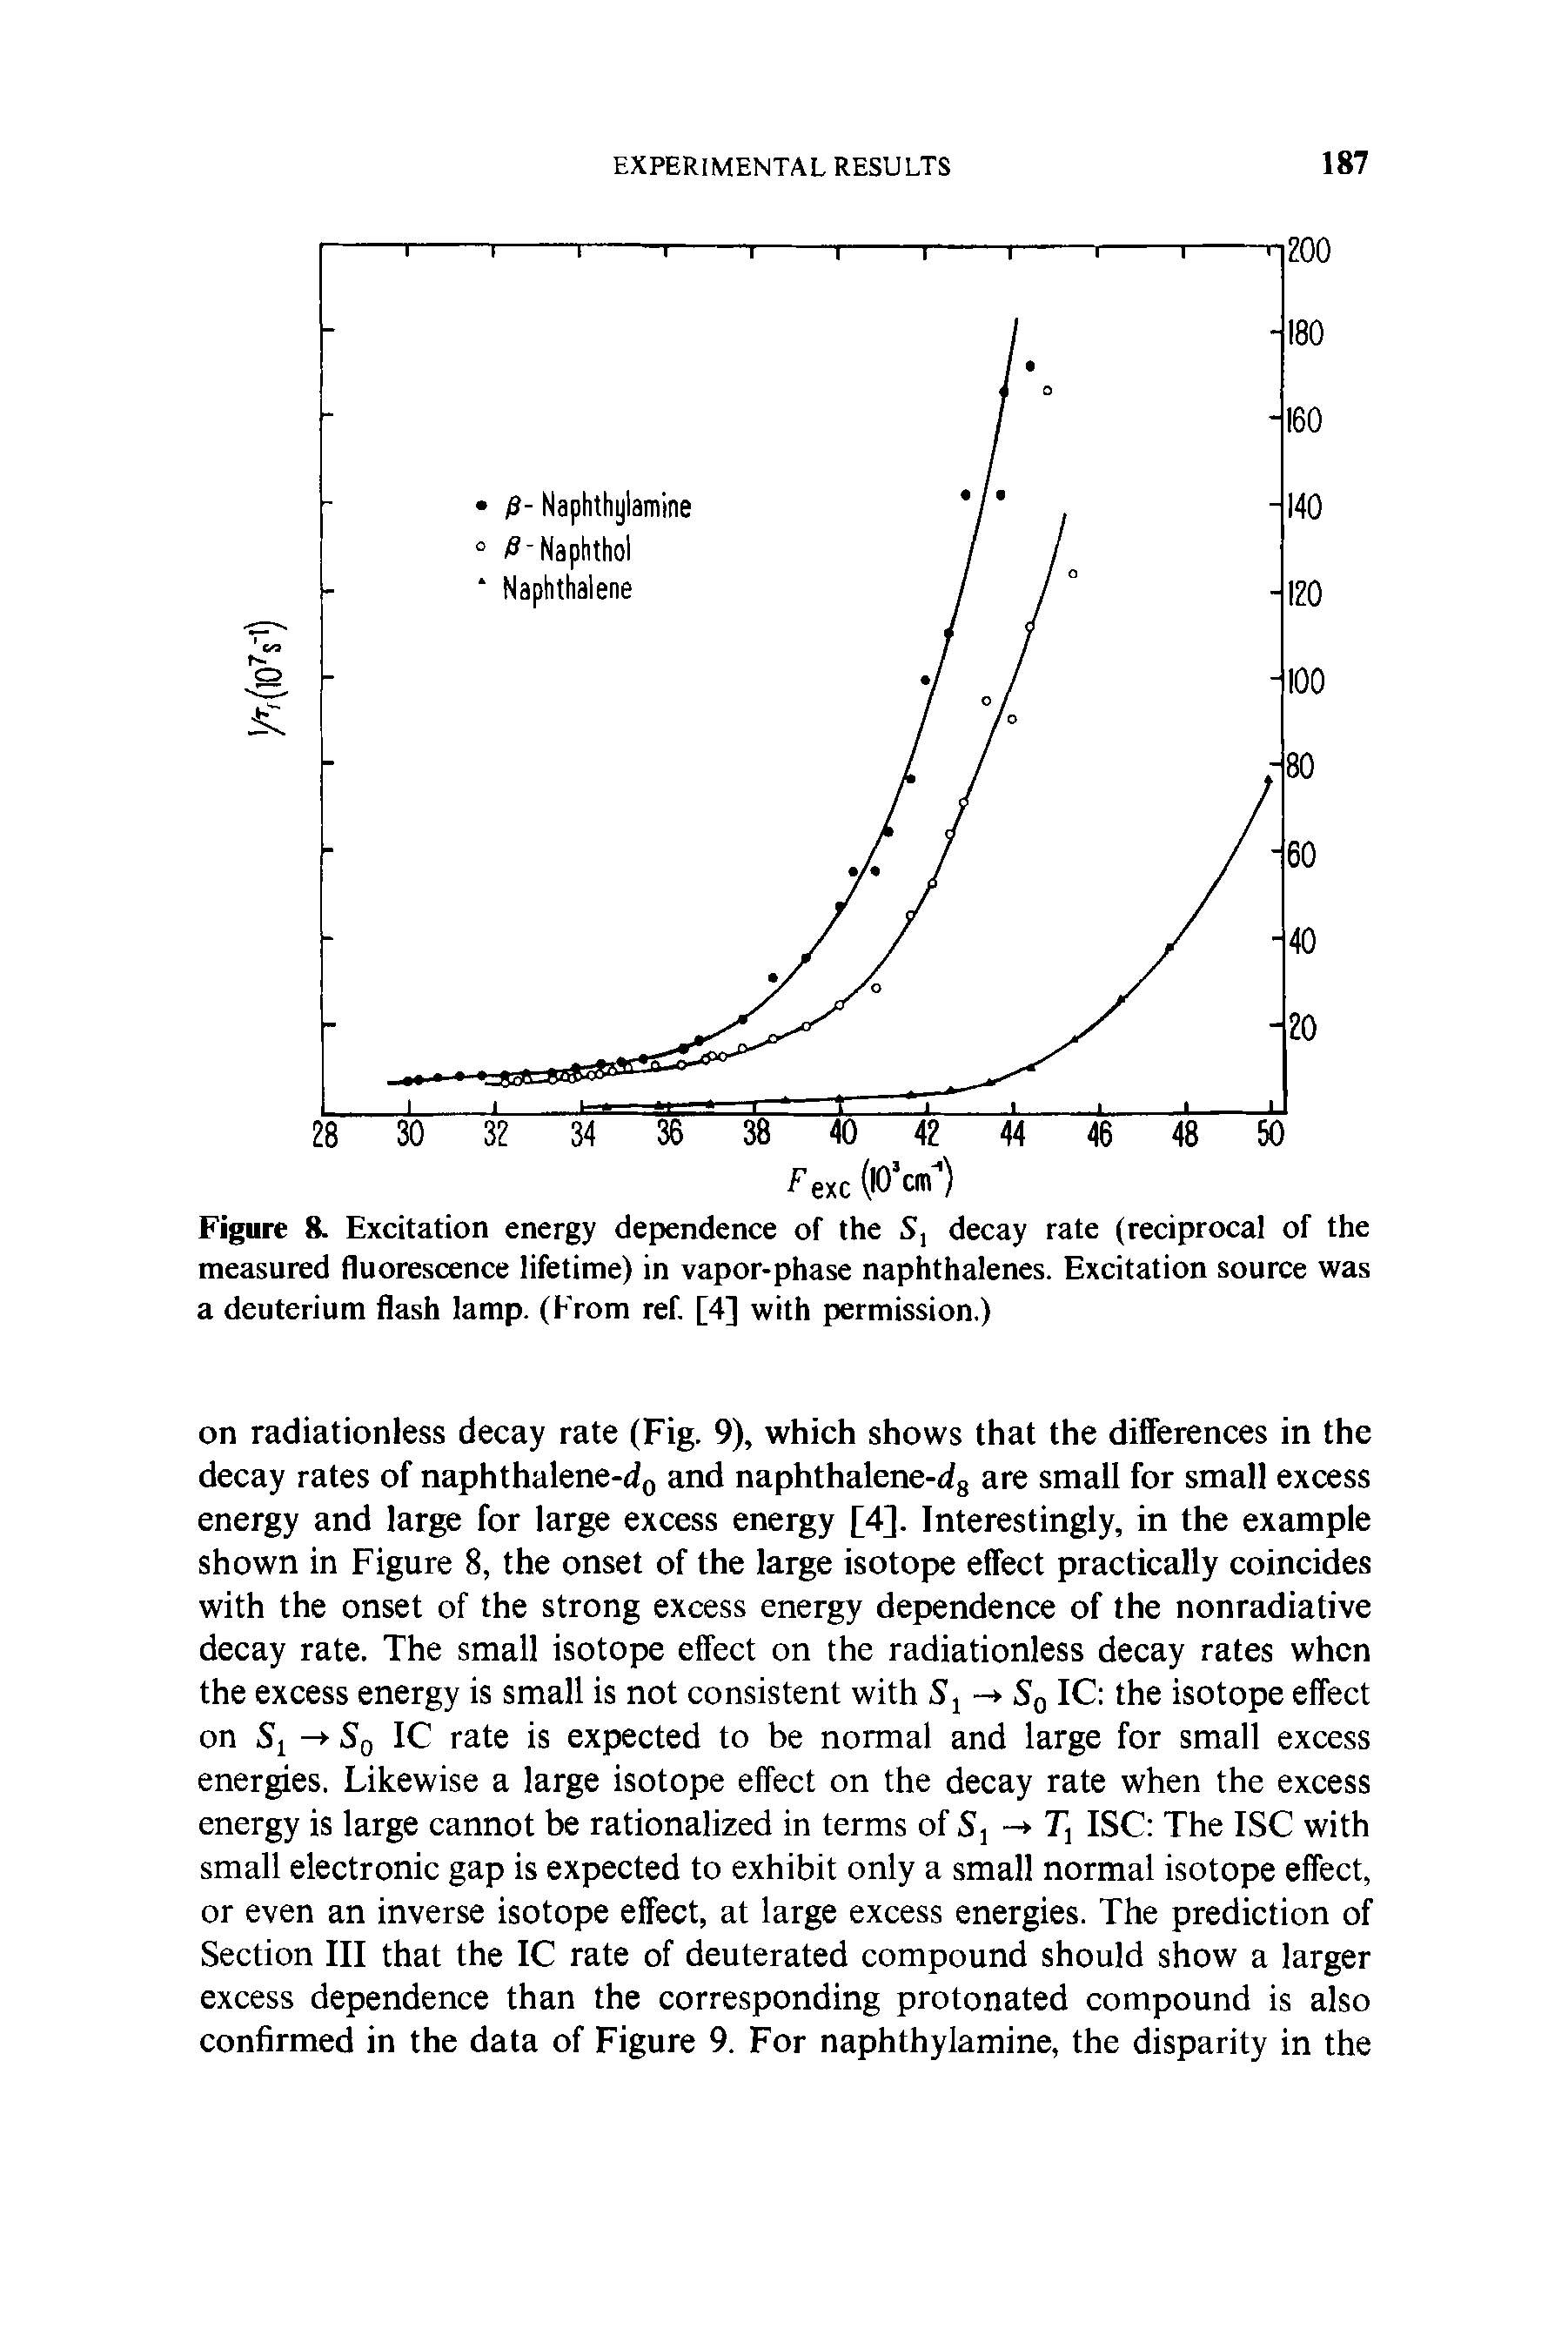 Figure 8. Excitation energy dependence of the S, decay rate (reciprocal of the measured fluorescence lifetime) in vapor-phase naphthalenes. Excitation source was a deuterium flash lamp. (From ref. [4] with permission.)...